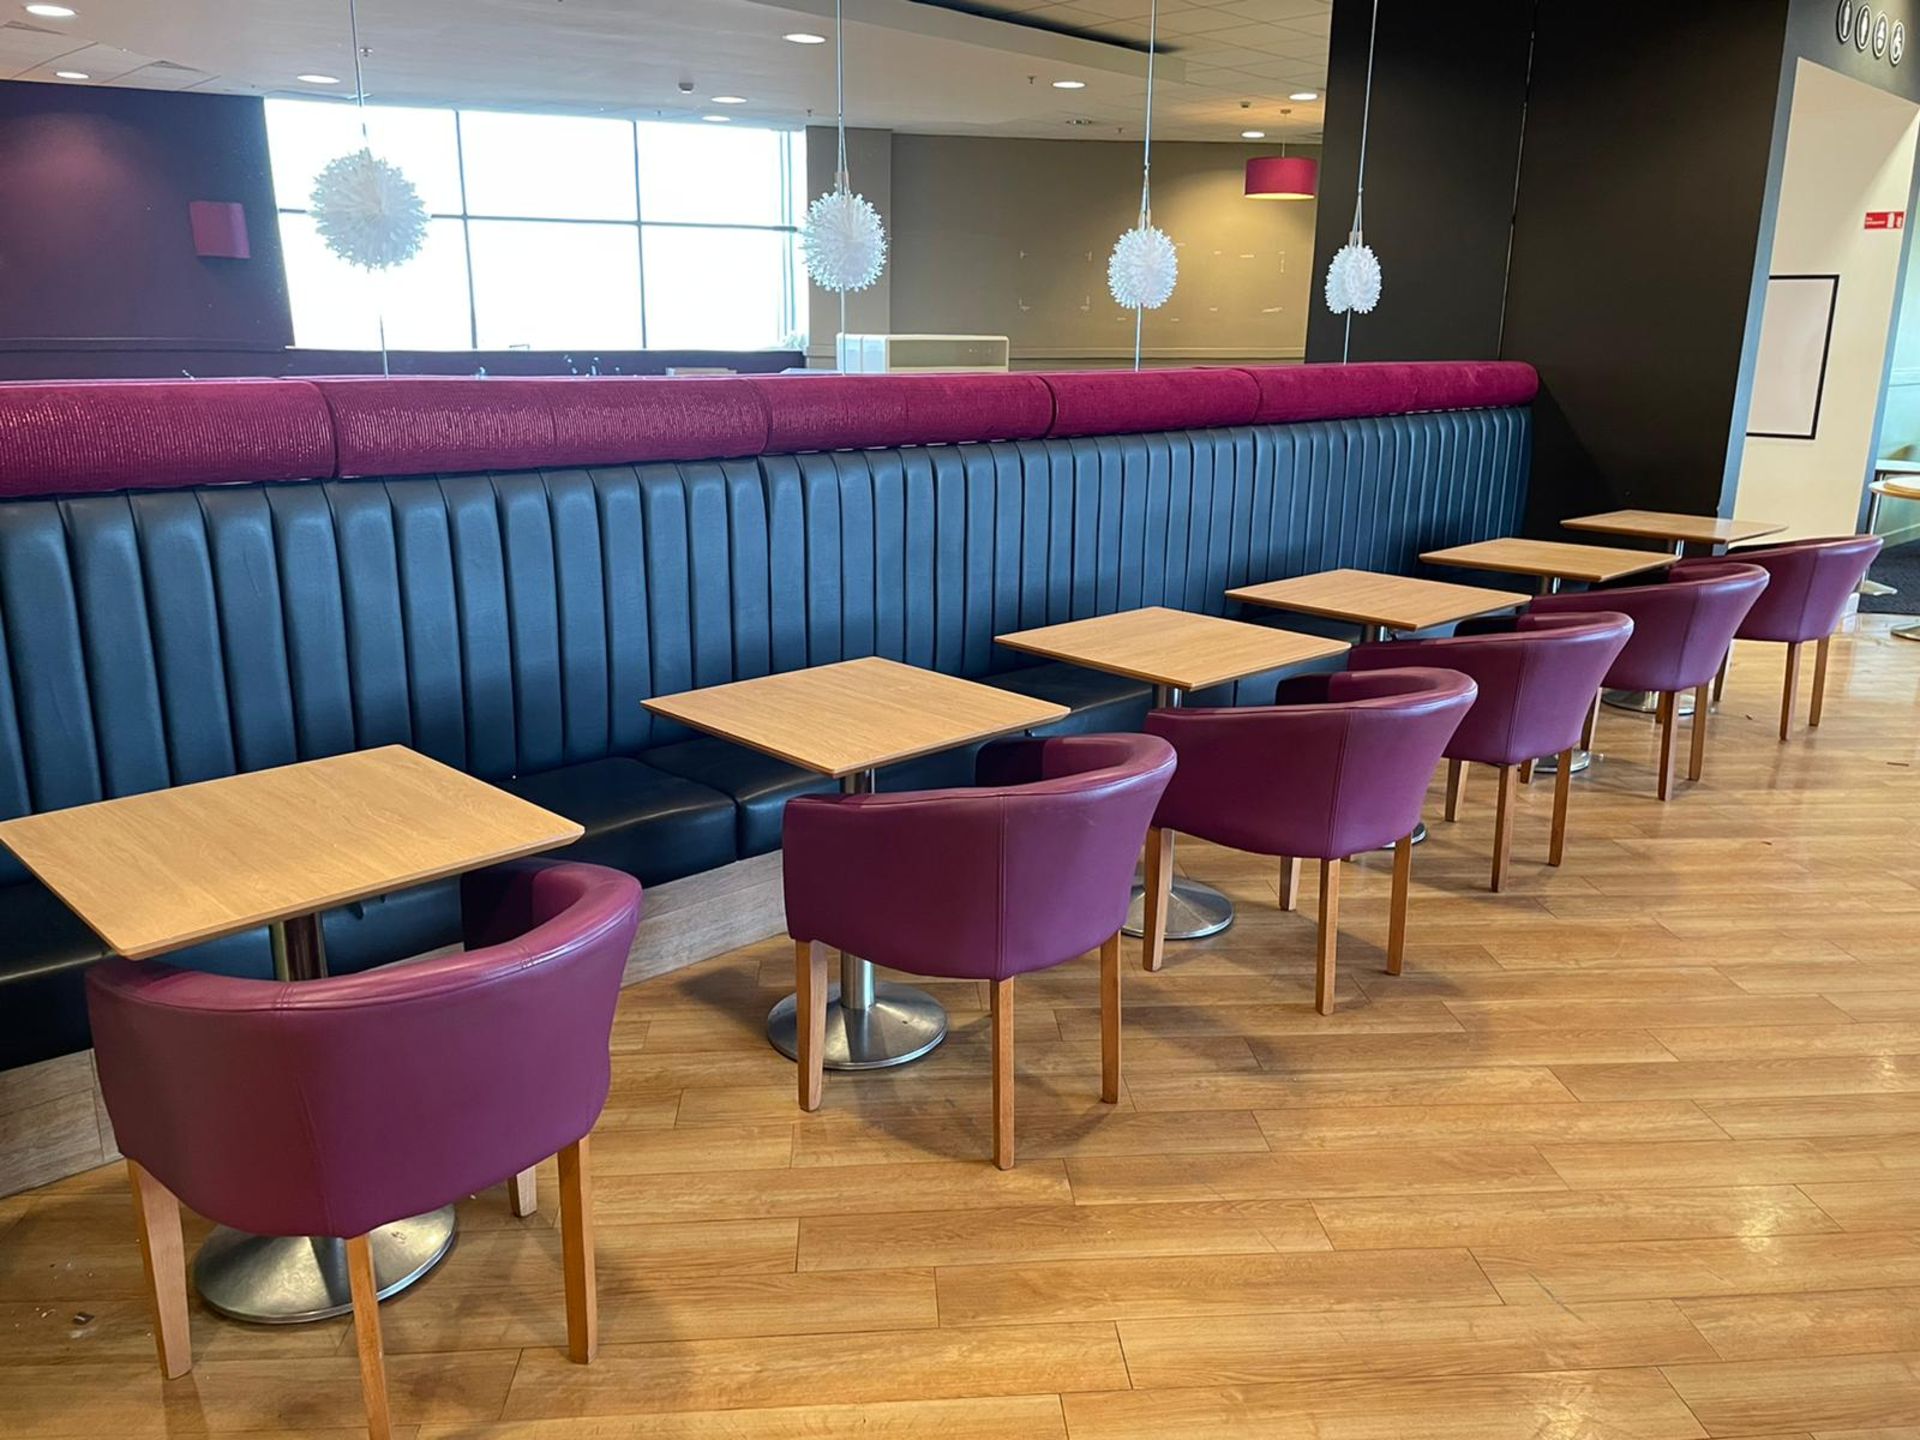 Bench Seating, 6 Tables And 6 Chairs